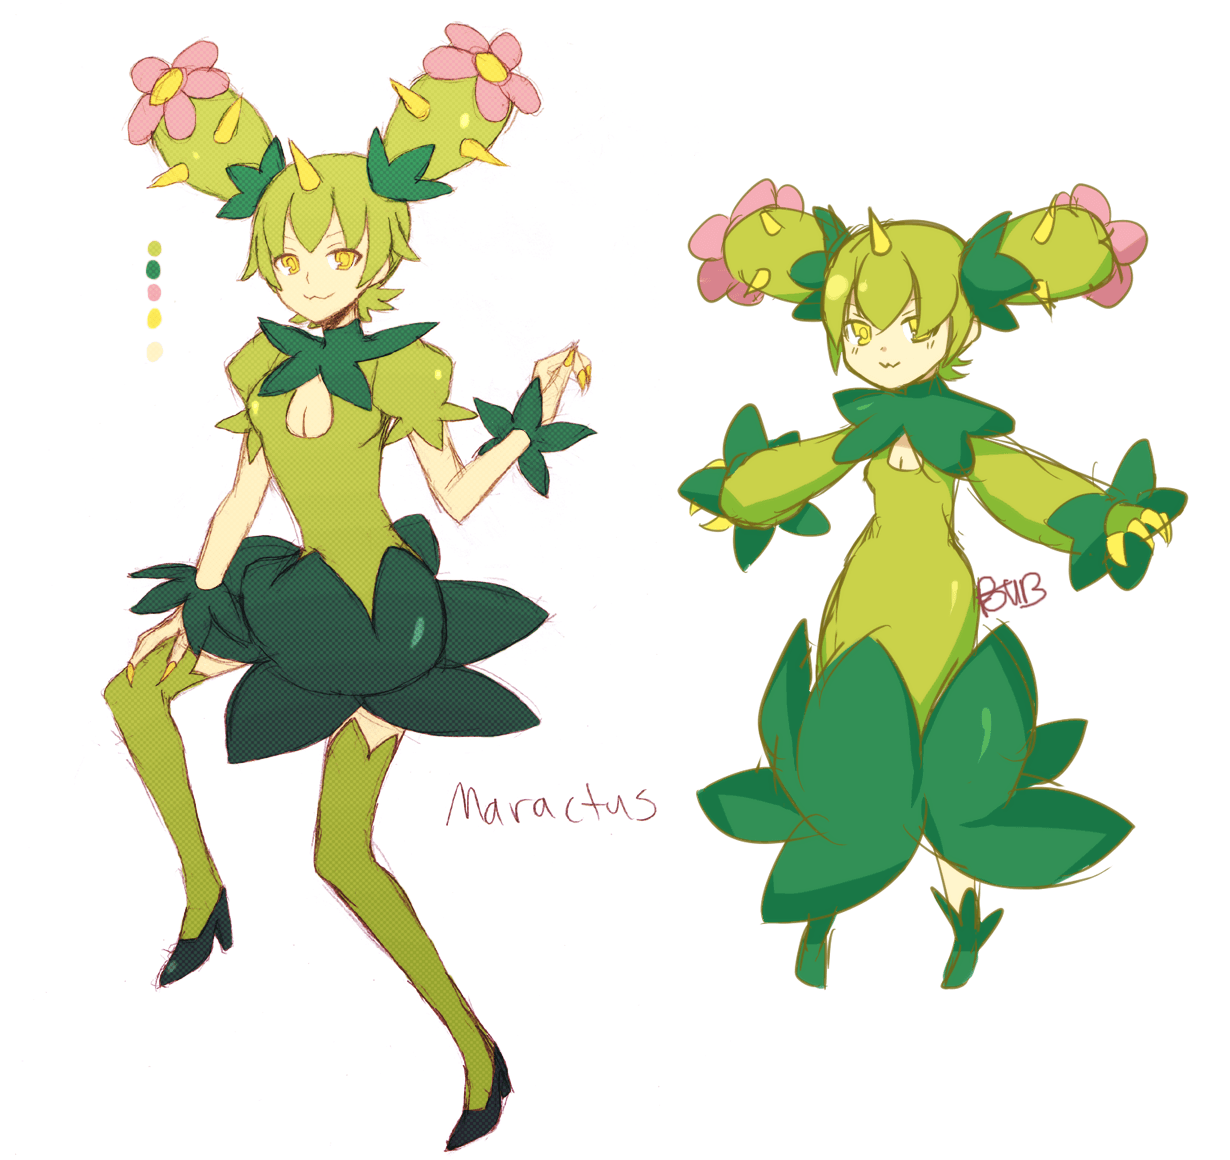 Pokemon Maractus - named her Mary Kay after the line of cosmetics